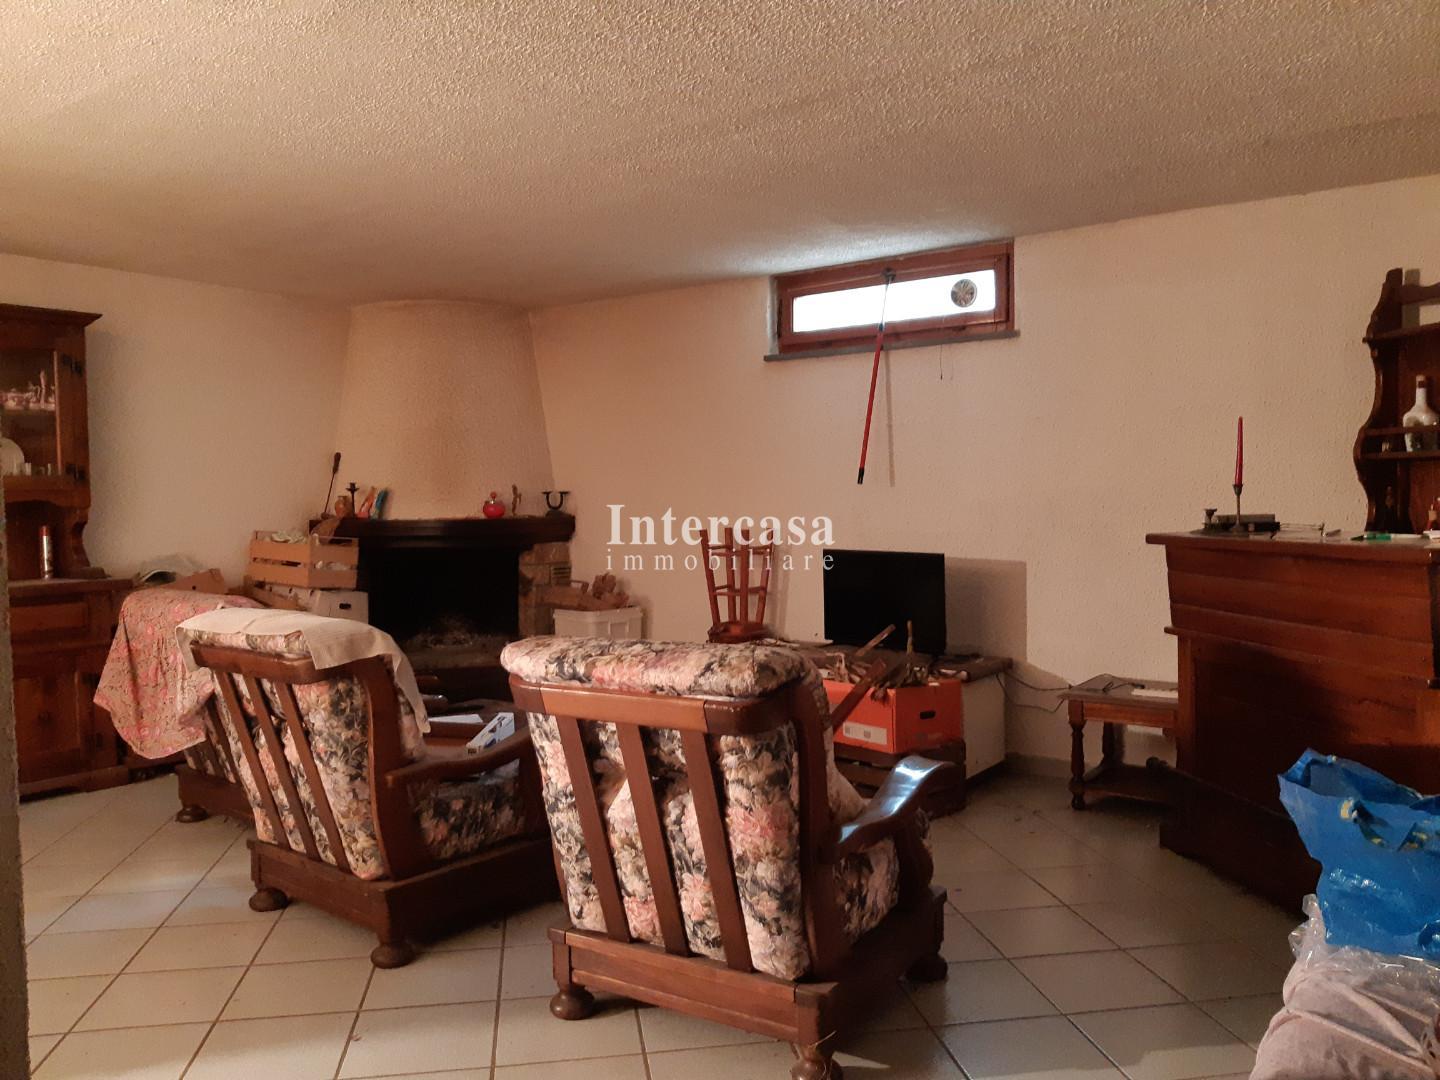 Three-family cottage for sale in San Giuliano Terme (PI)